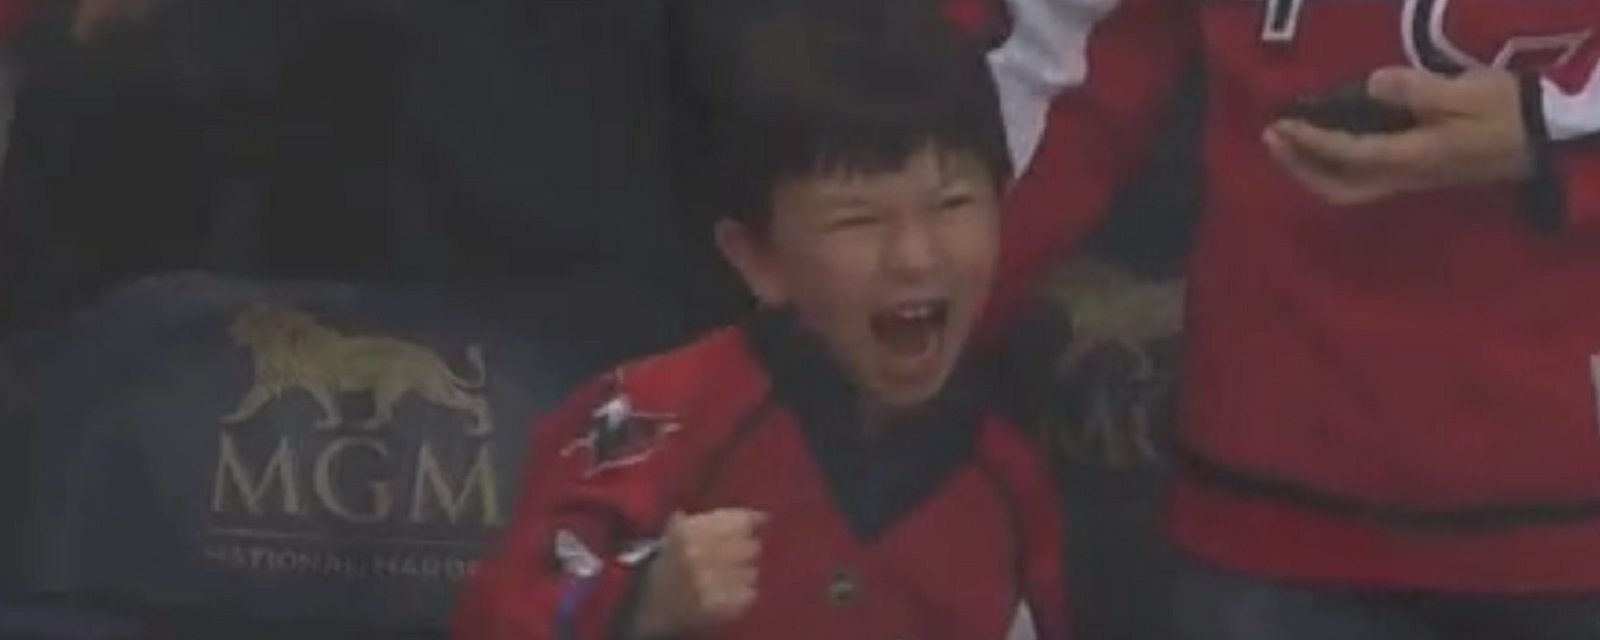 Backstrom gives puck to a young fan, his reaction is unforgettable. 